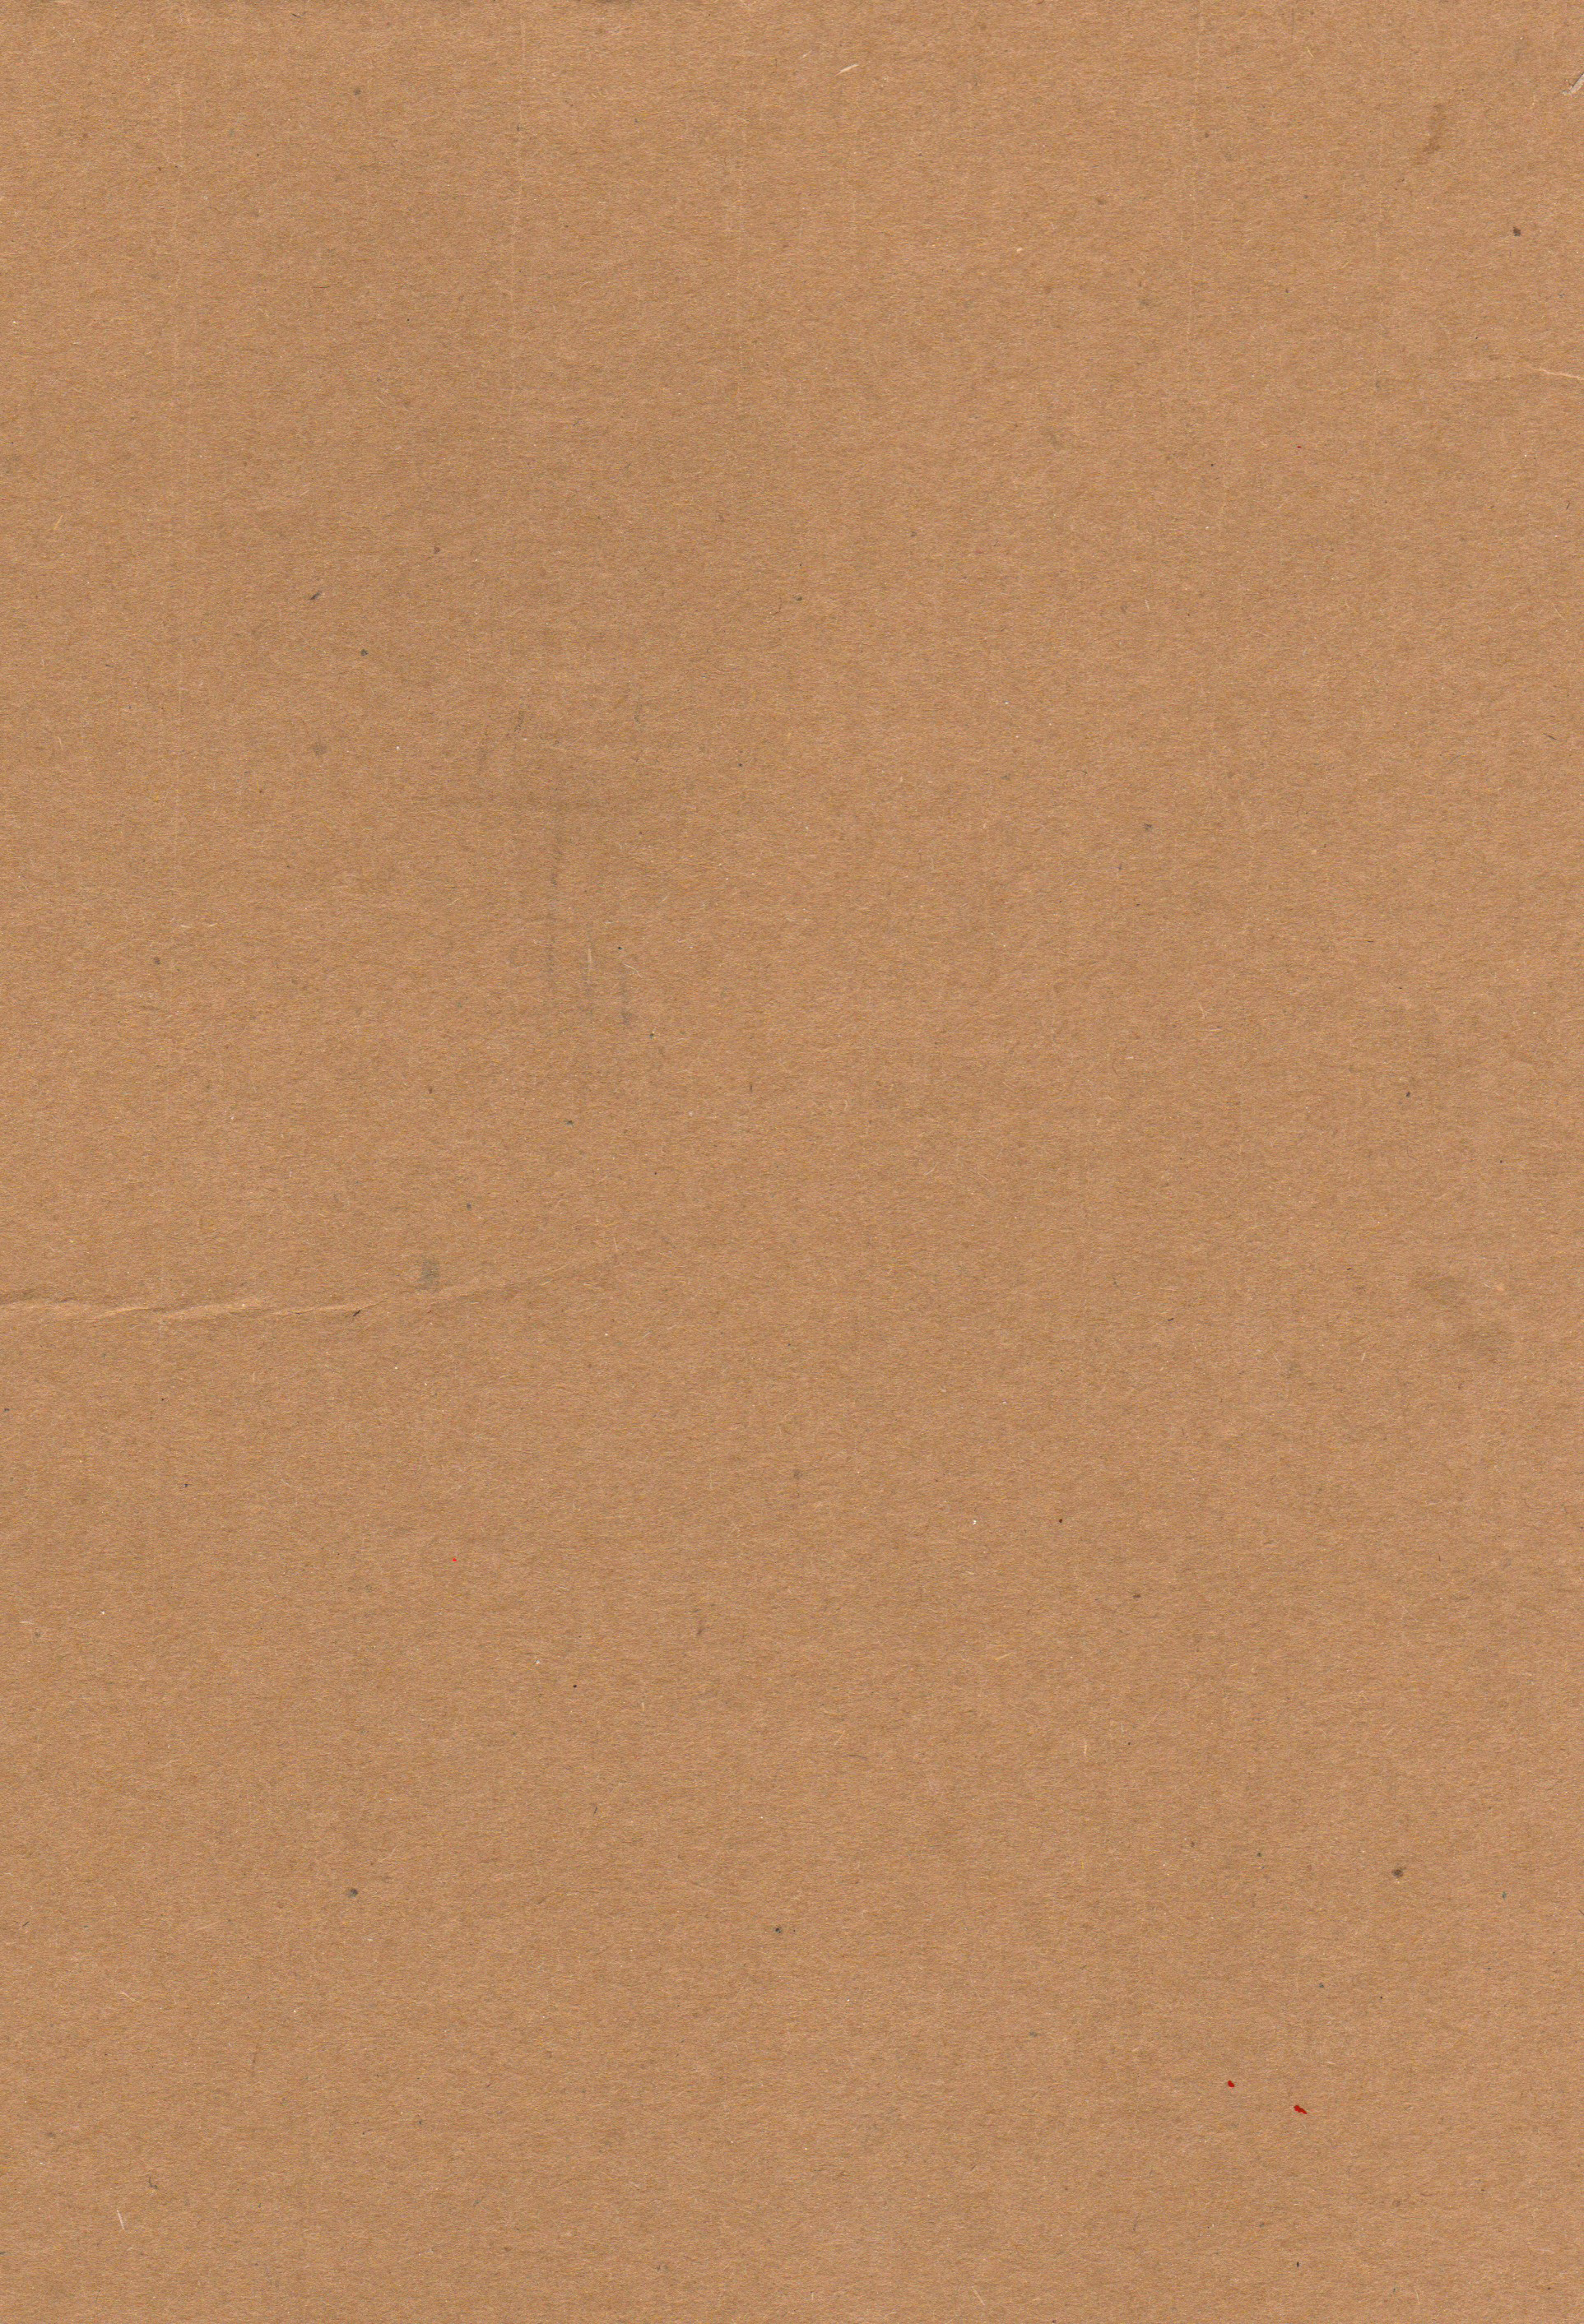 Premium Photo  Old of brown craft paper box texture for background